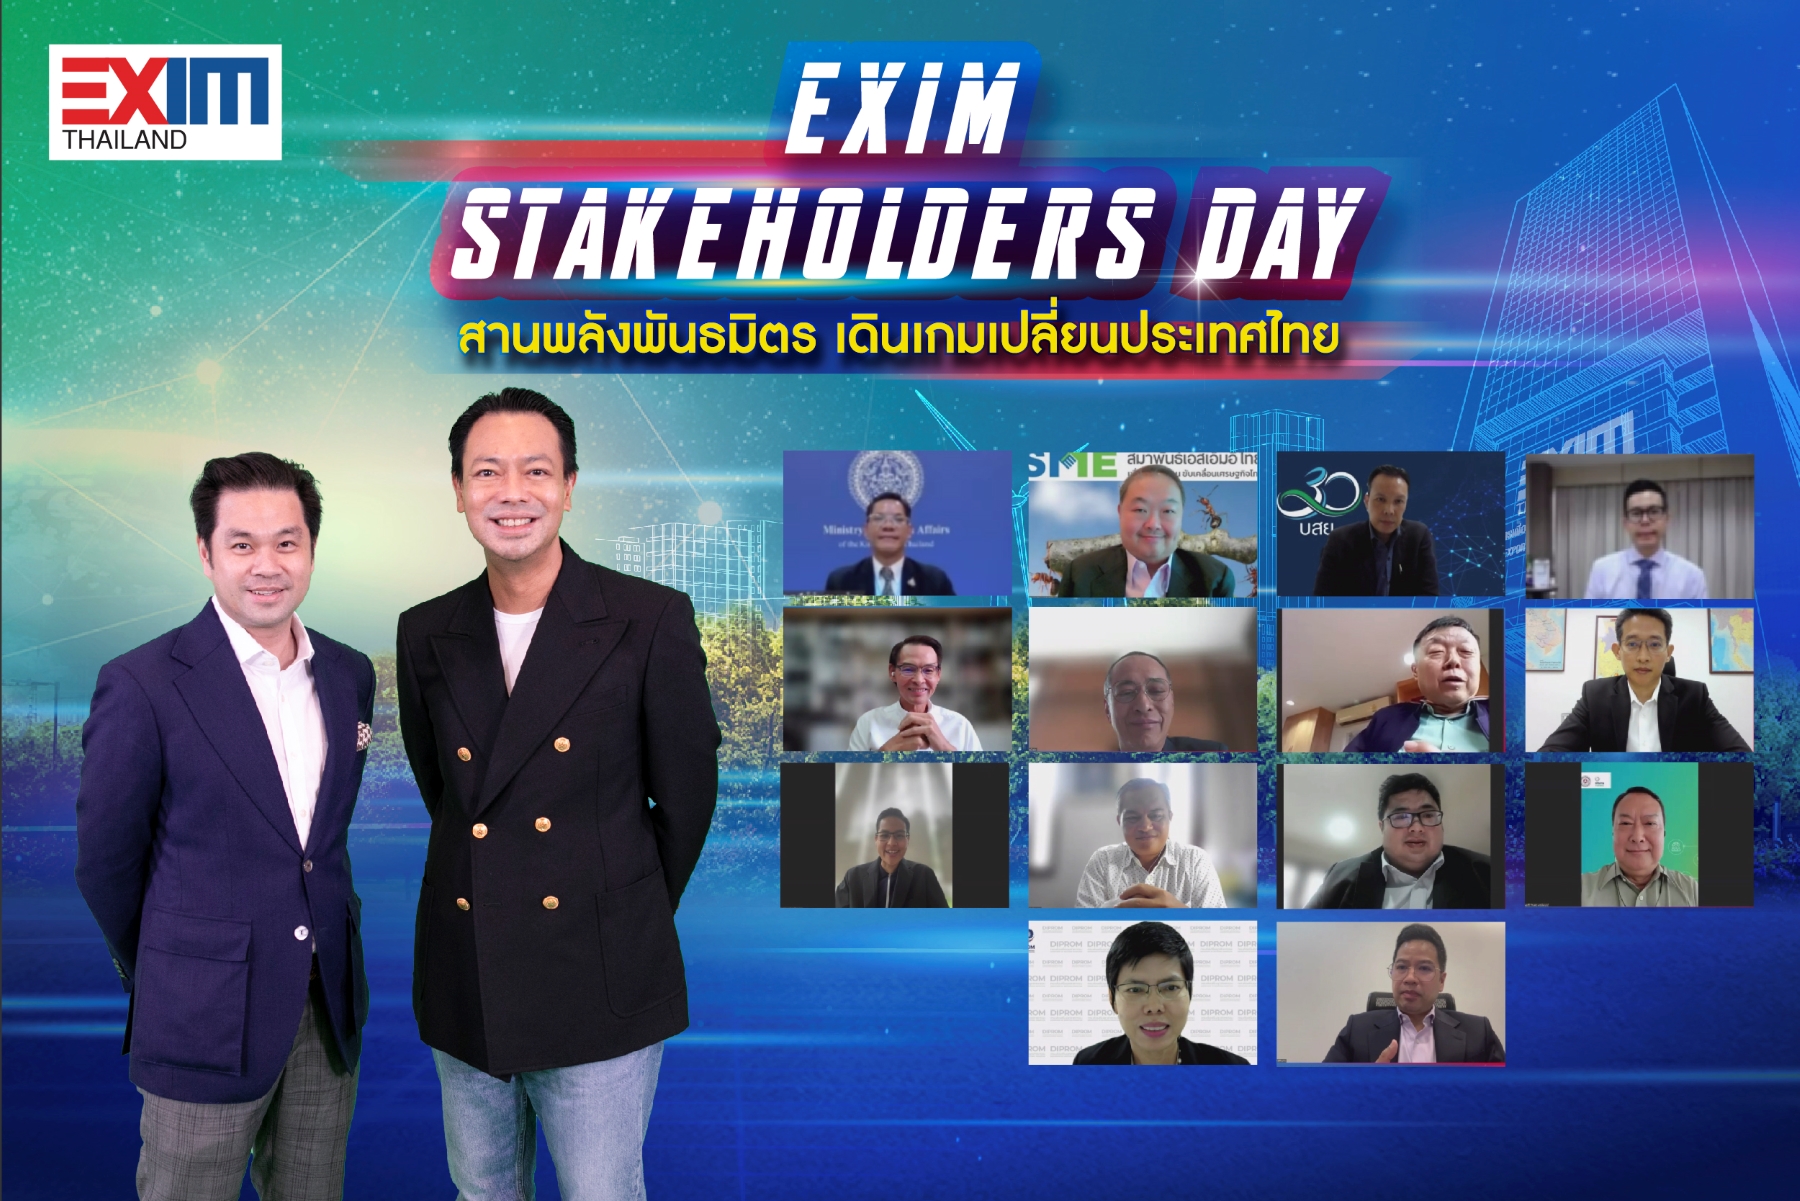 EXIM Thailand Holds Forum for Stakeholders’ Brainstorming  to Drive Sustainable Development at EXIM Stakeholders Day themed “Synergizing Alliances as Thailand Game Changer”